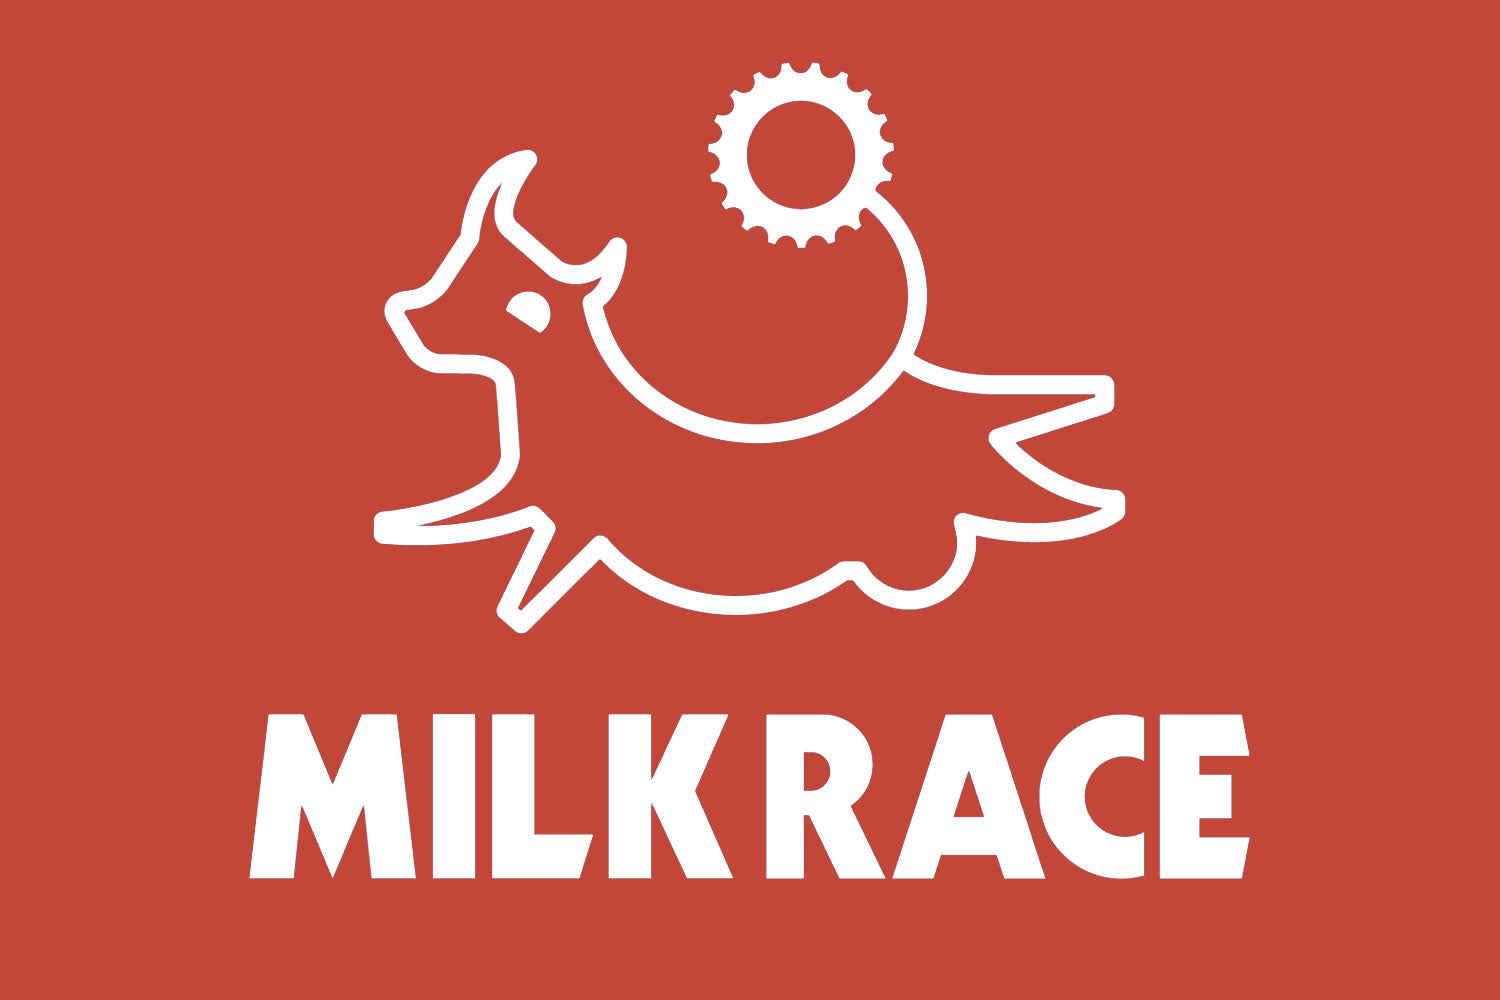 The Milk Race - The squid and the whale